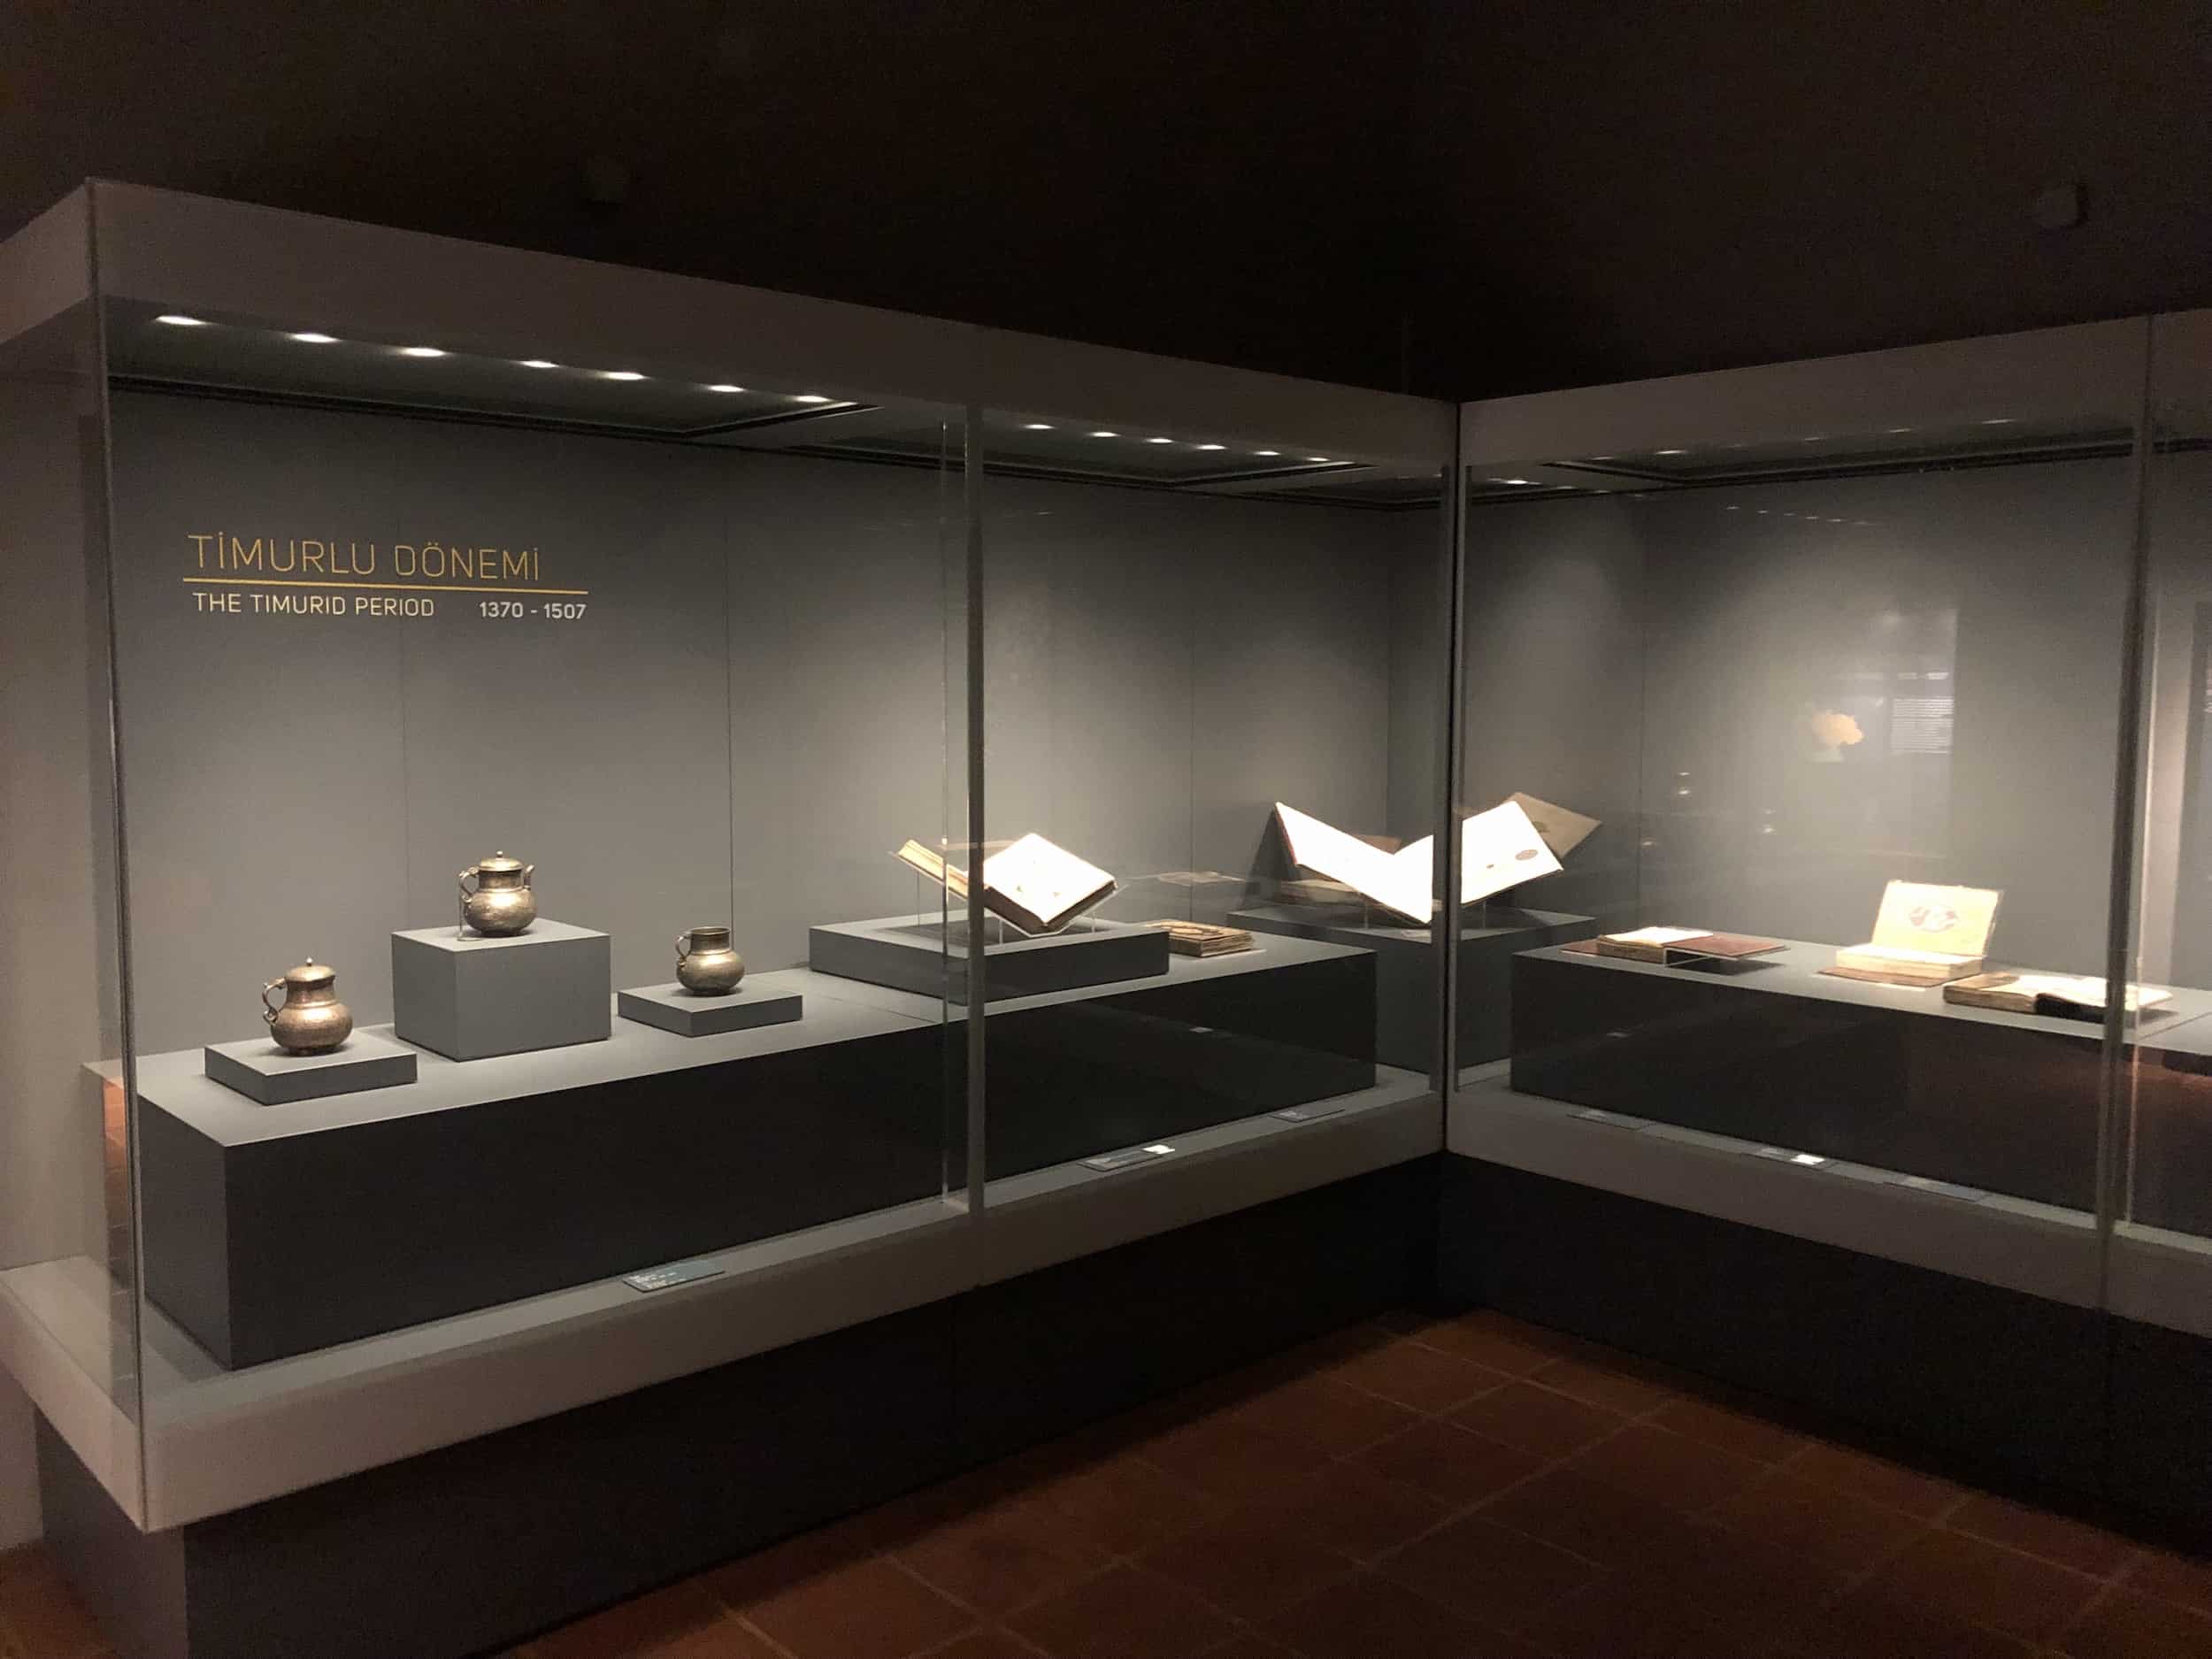 Timurid Period at the Museum of Turkish and Islamic Arts in Istanbul, Turkey